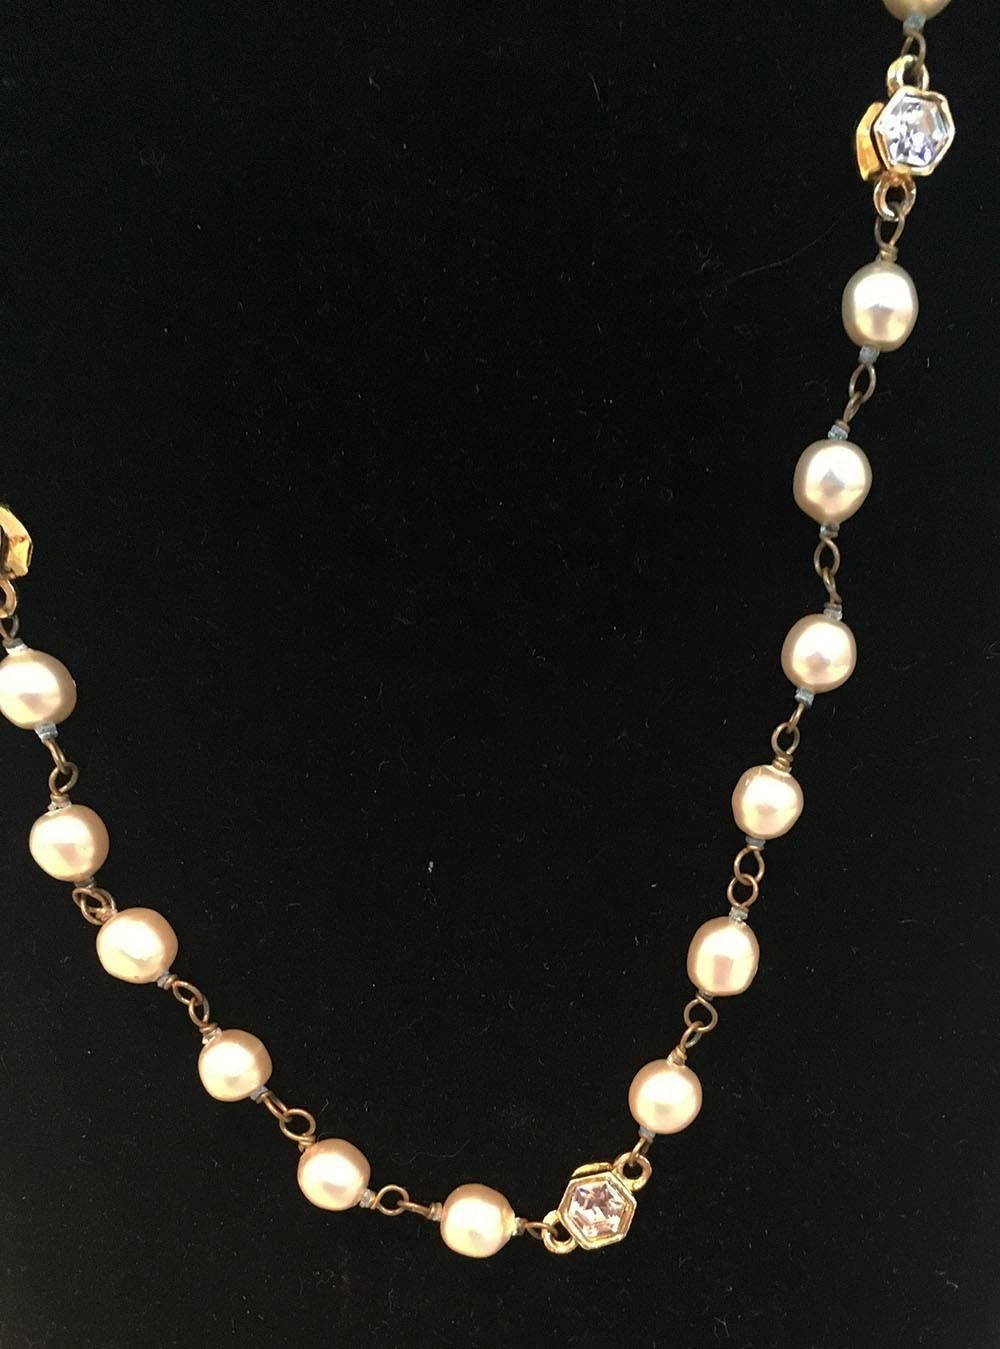 Classic Chanel Vintage Pearl and Small Crystal Beaded Necklace in very good condition. Round pearl beads with small gold hexagon shape beads with centered crystals on 2 sides. Crystal hexagons every 6 pearls. Spring ring closure. Engraved logo charm